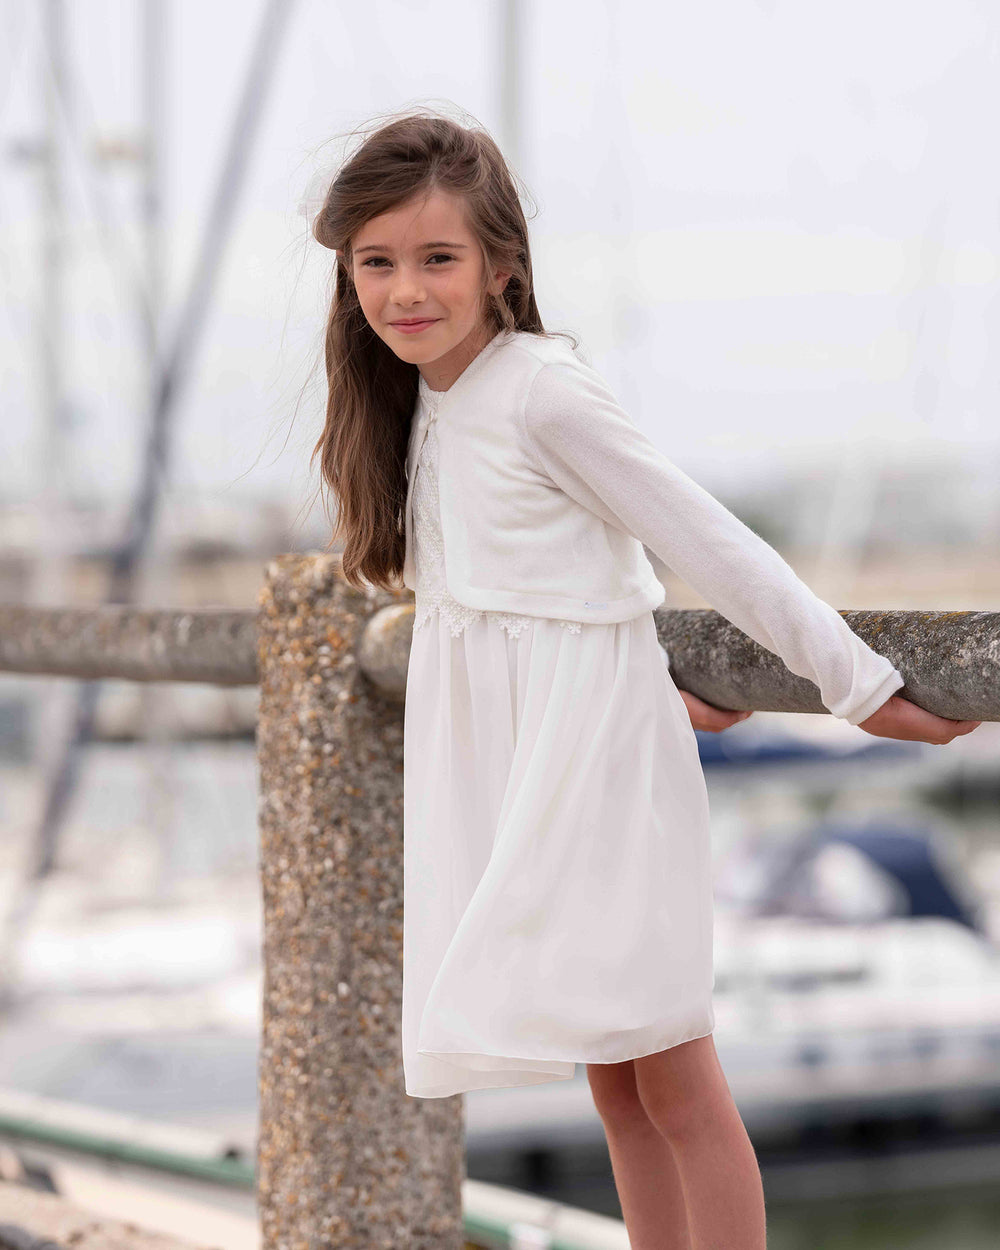 Supple white dress with detailed top and white cardigan